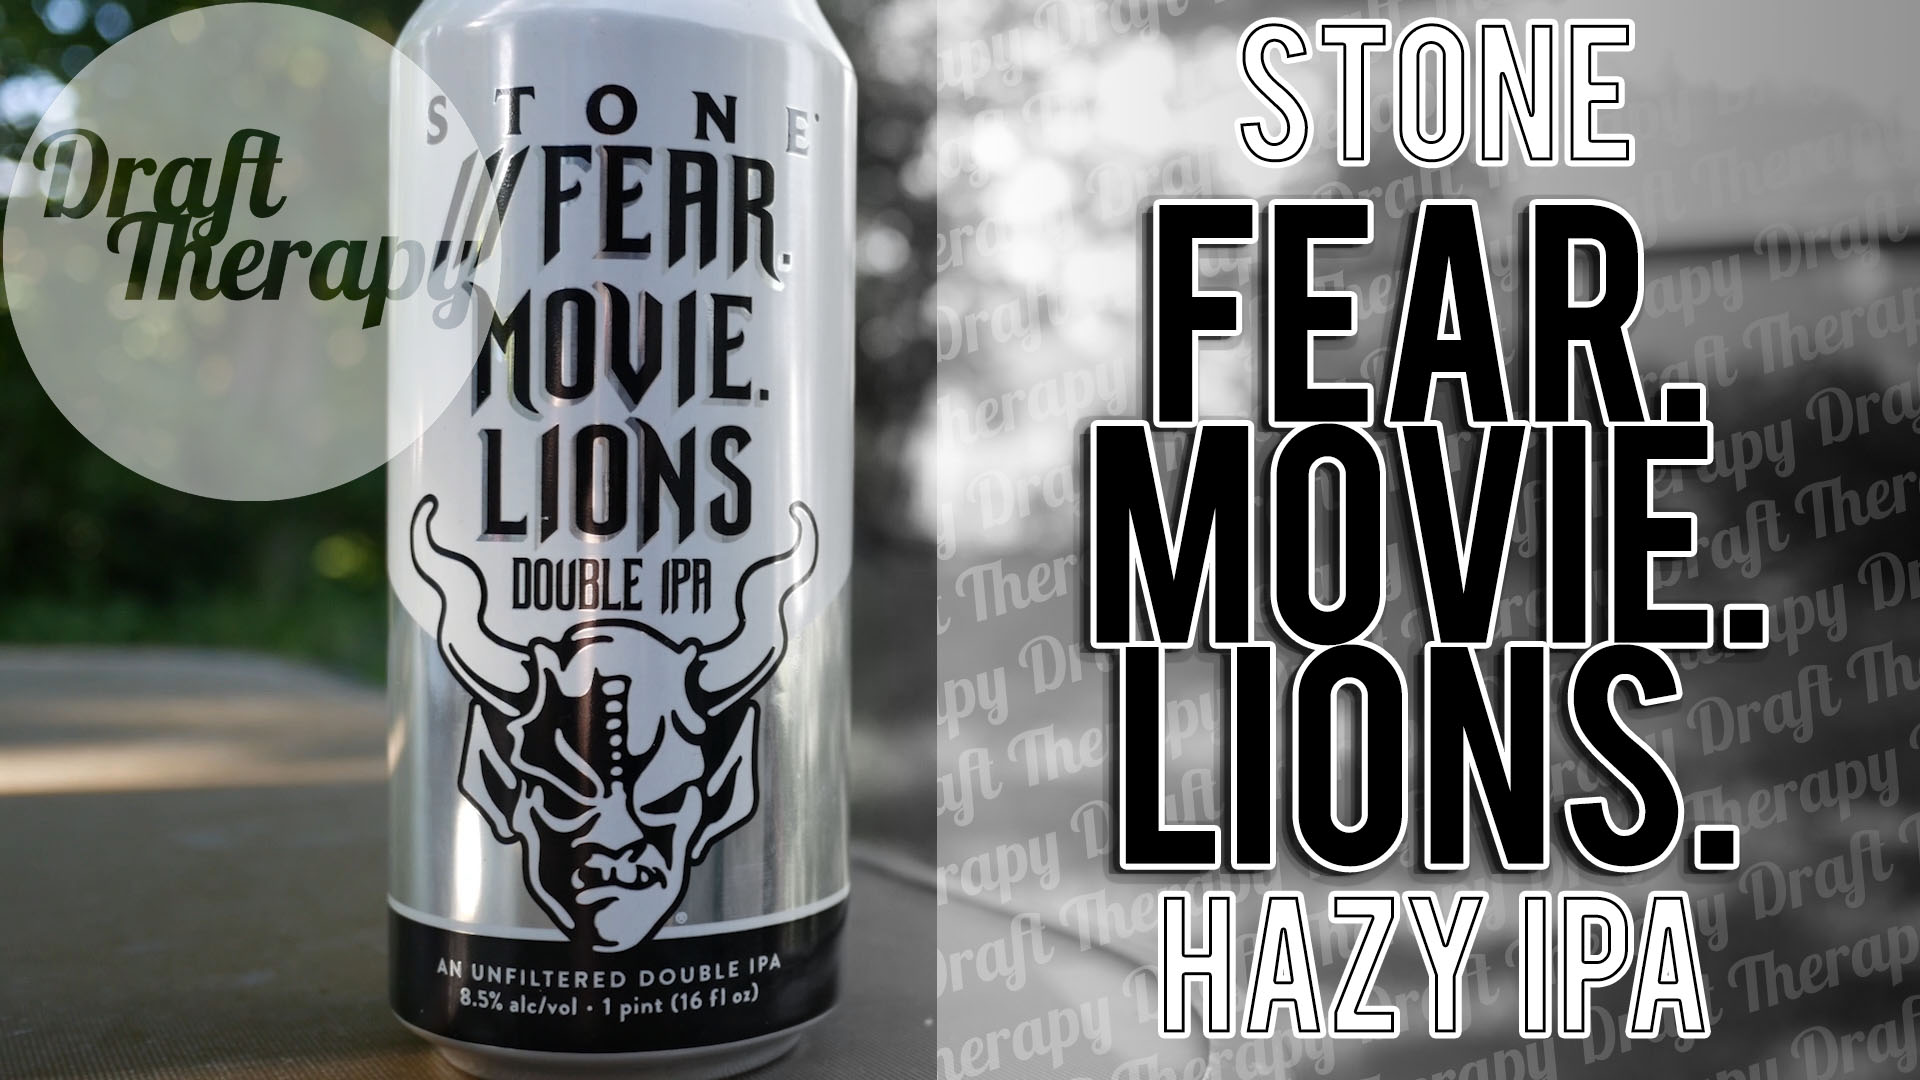 You are currently viewing Stone Brewing – Fear Movie Lions